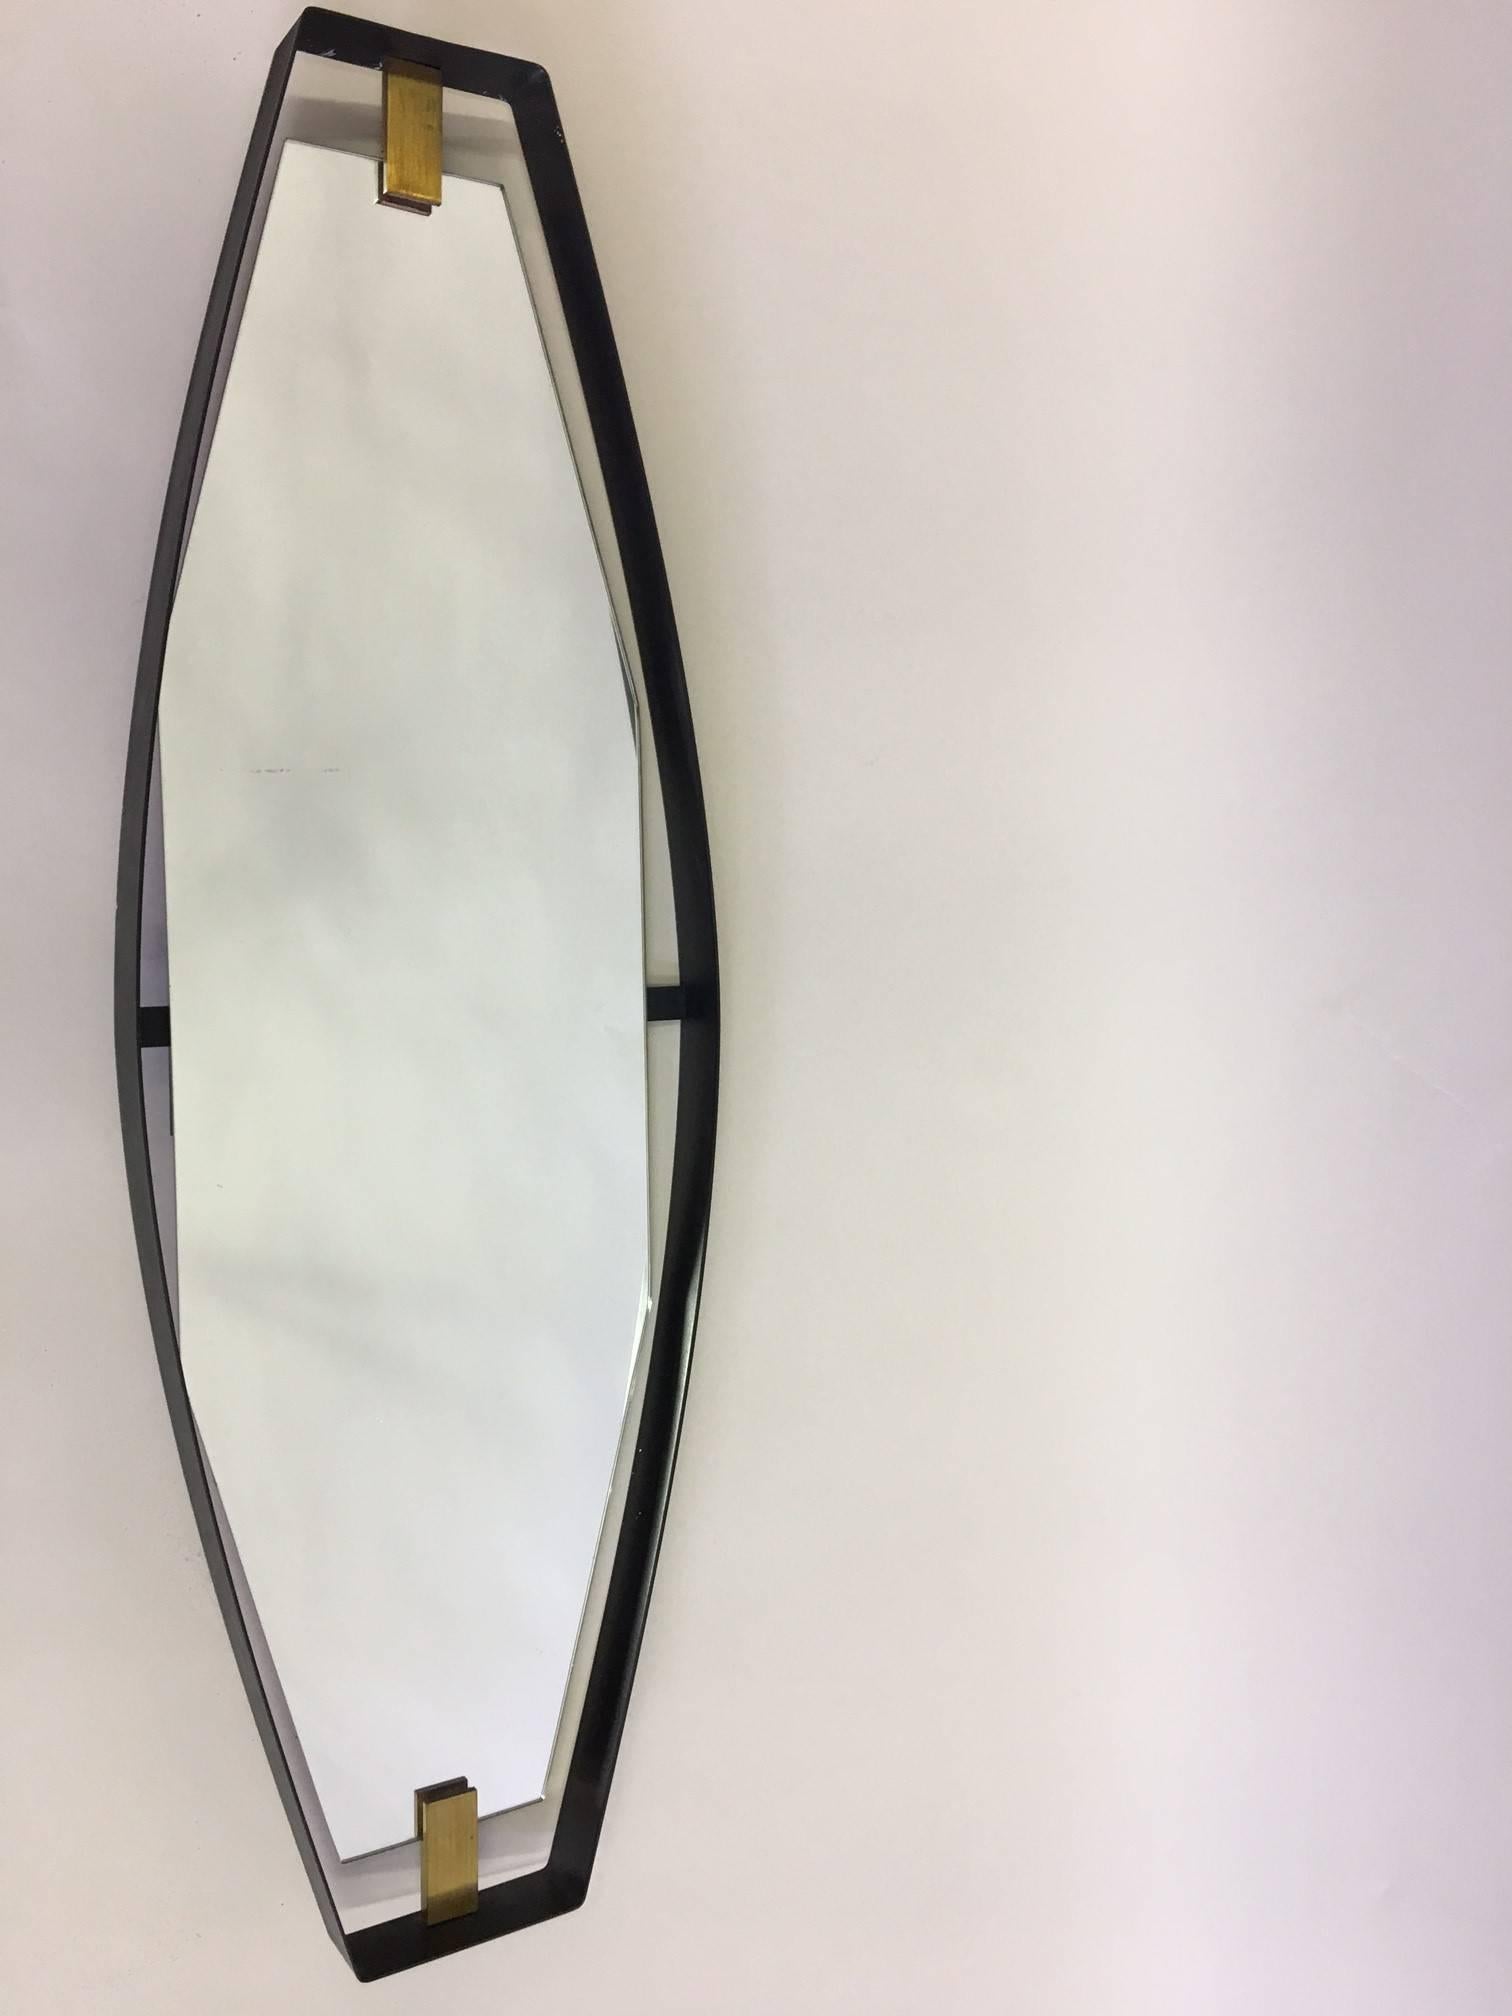 2 Important Italian, Mid-Century Modern mirrors in a rare sculptural, canted form attributed to Max Ingrand for Fontana Arte, 1950. The mirror frame is constructed of a black enameled metal band fabricated in an long semi-oval form. Deeply inset